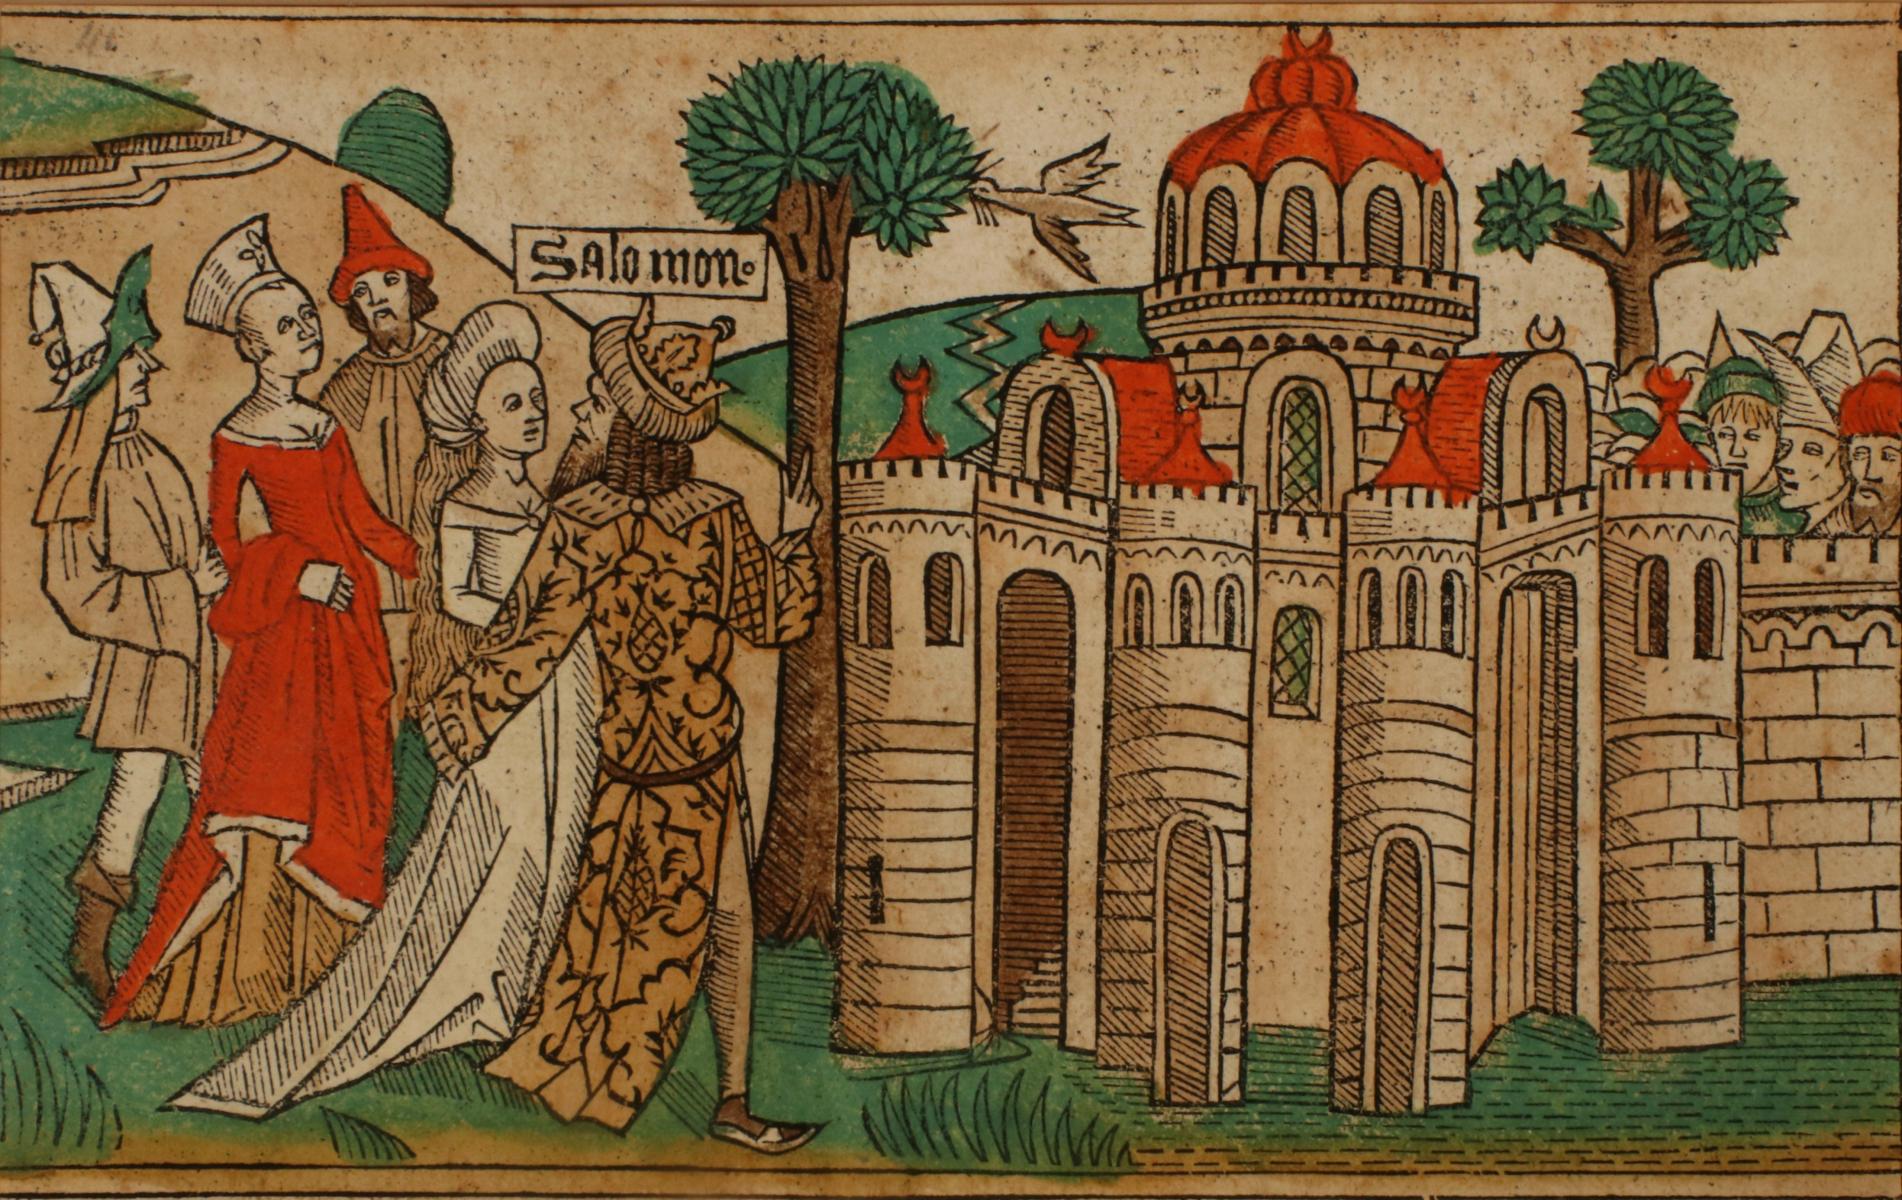 A HAND COLORED WOODCUT FROM KOBERGER'S BIBLE CA. 1483